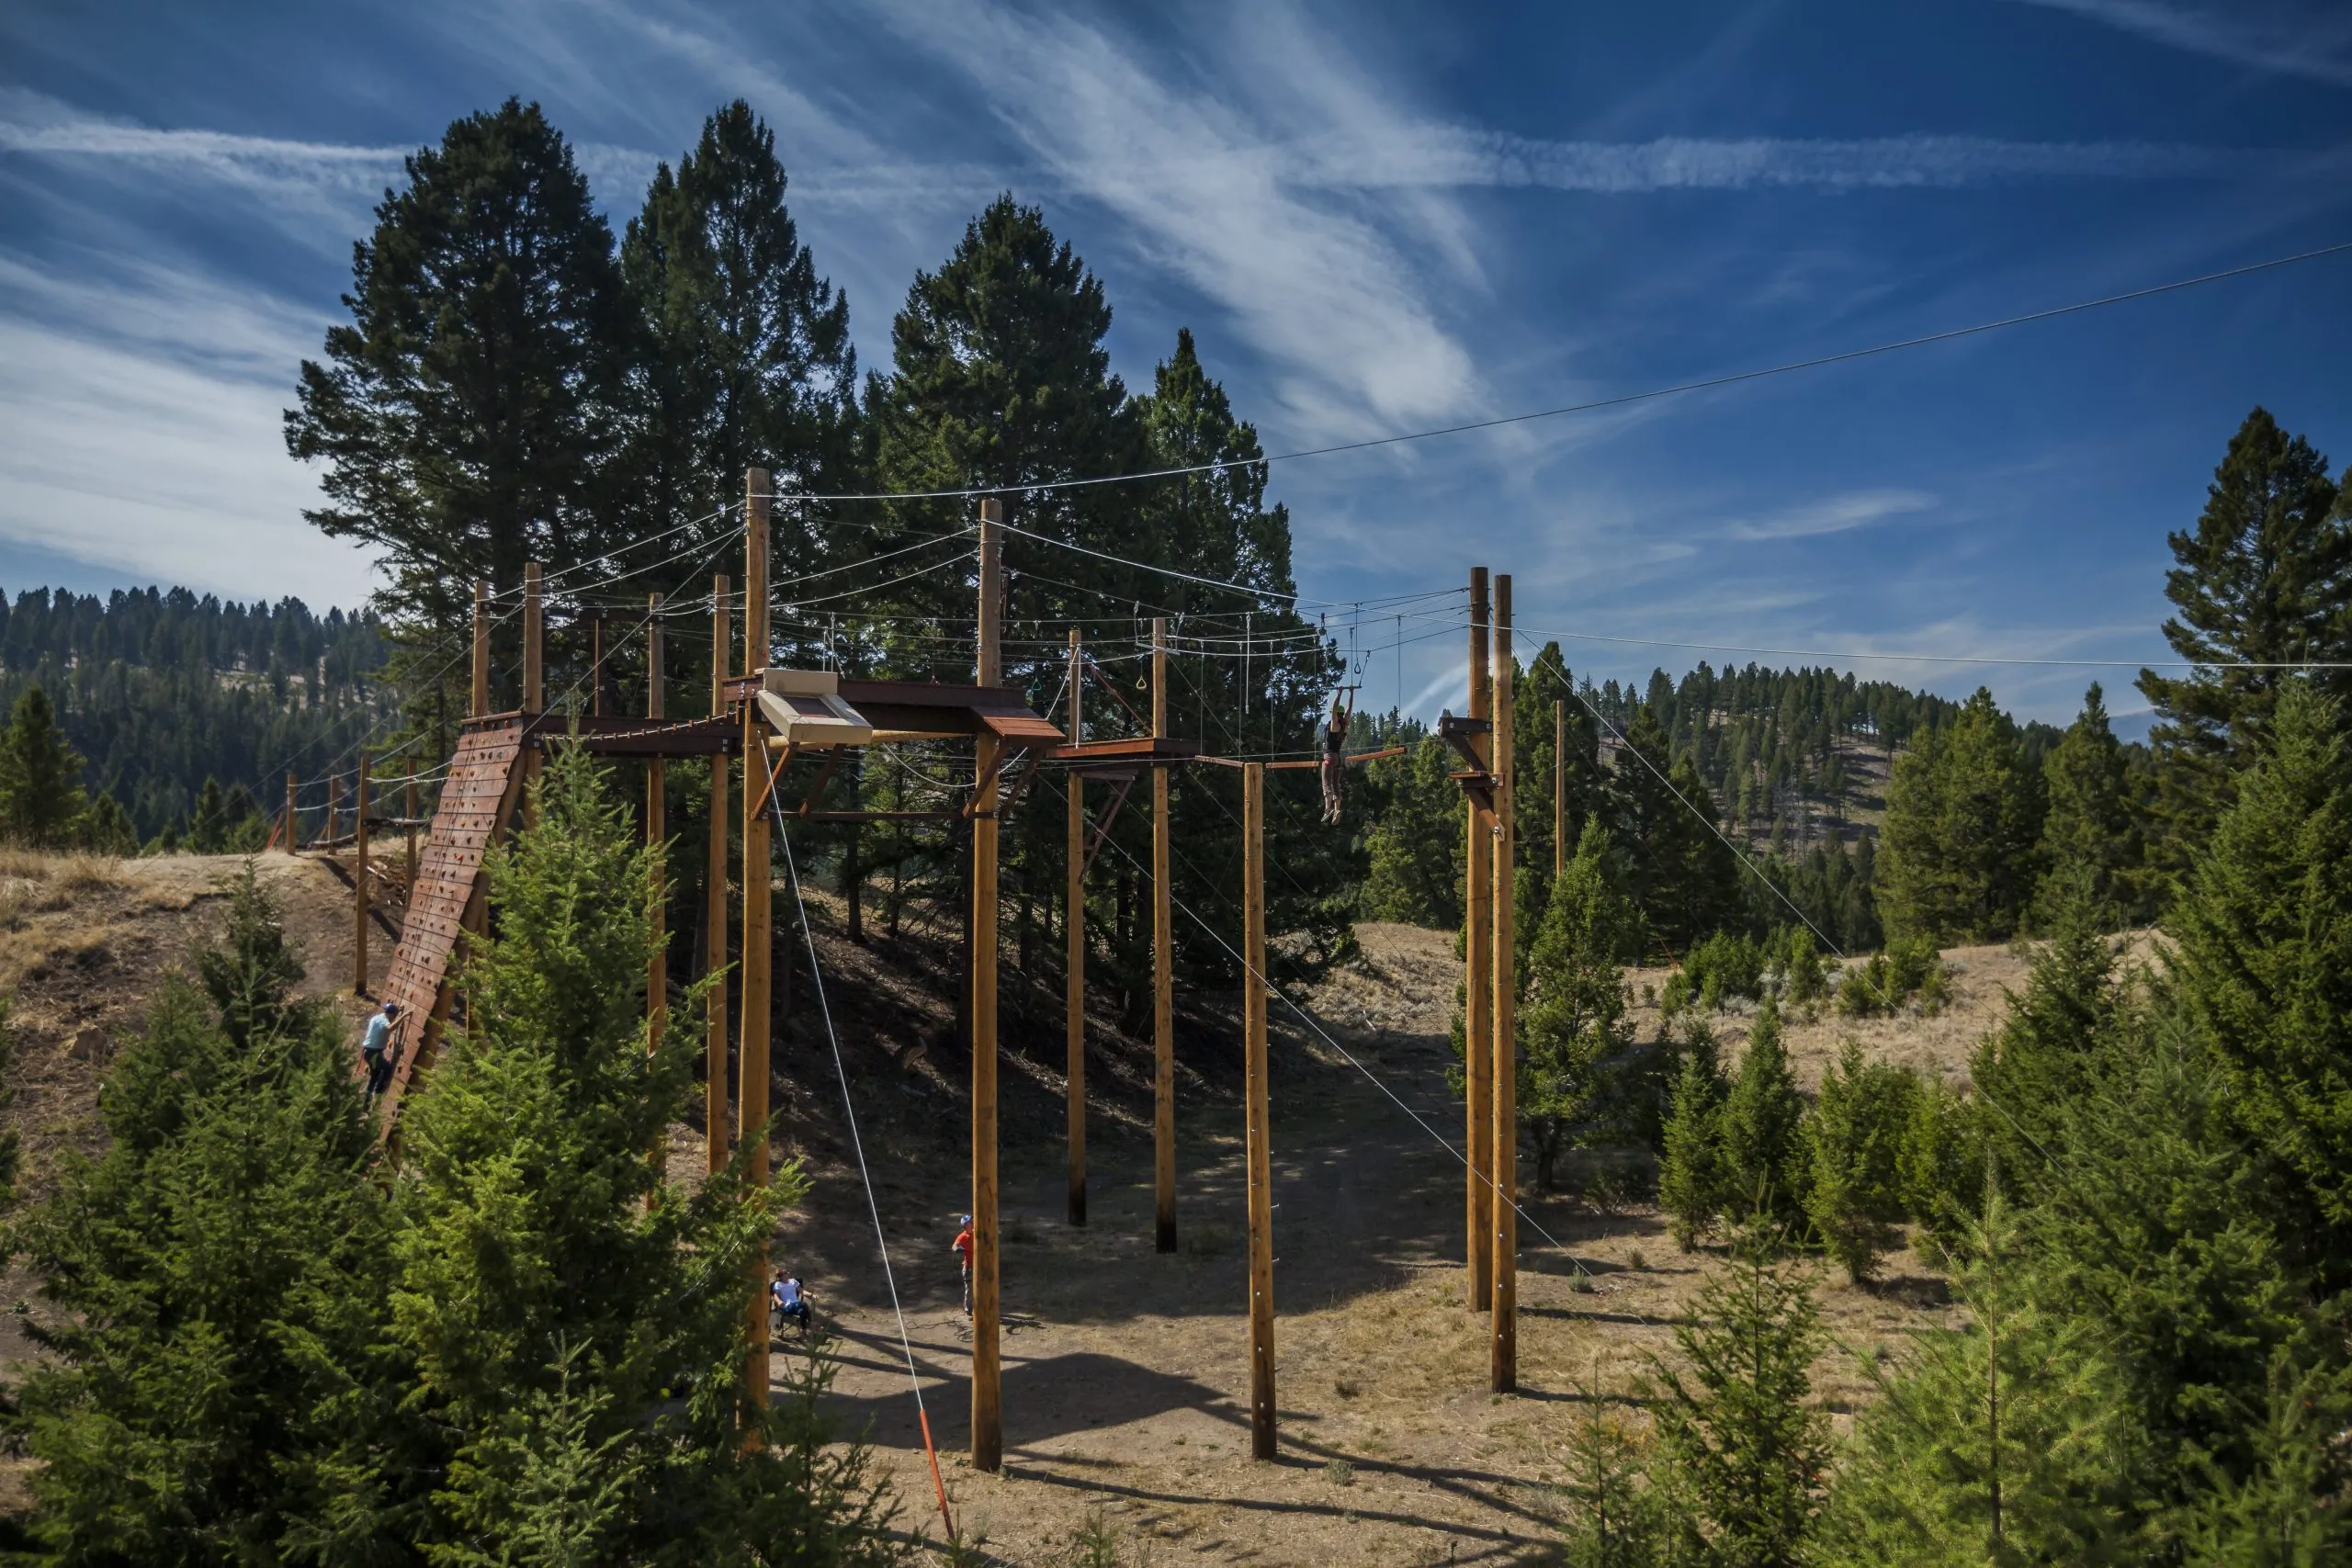 Rope course suspended high in the air with people interacting with it